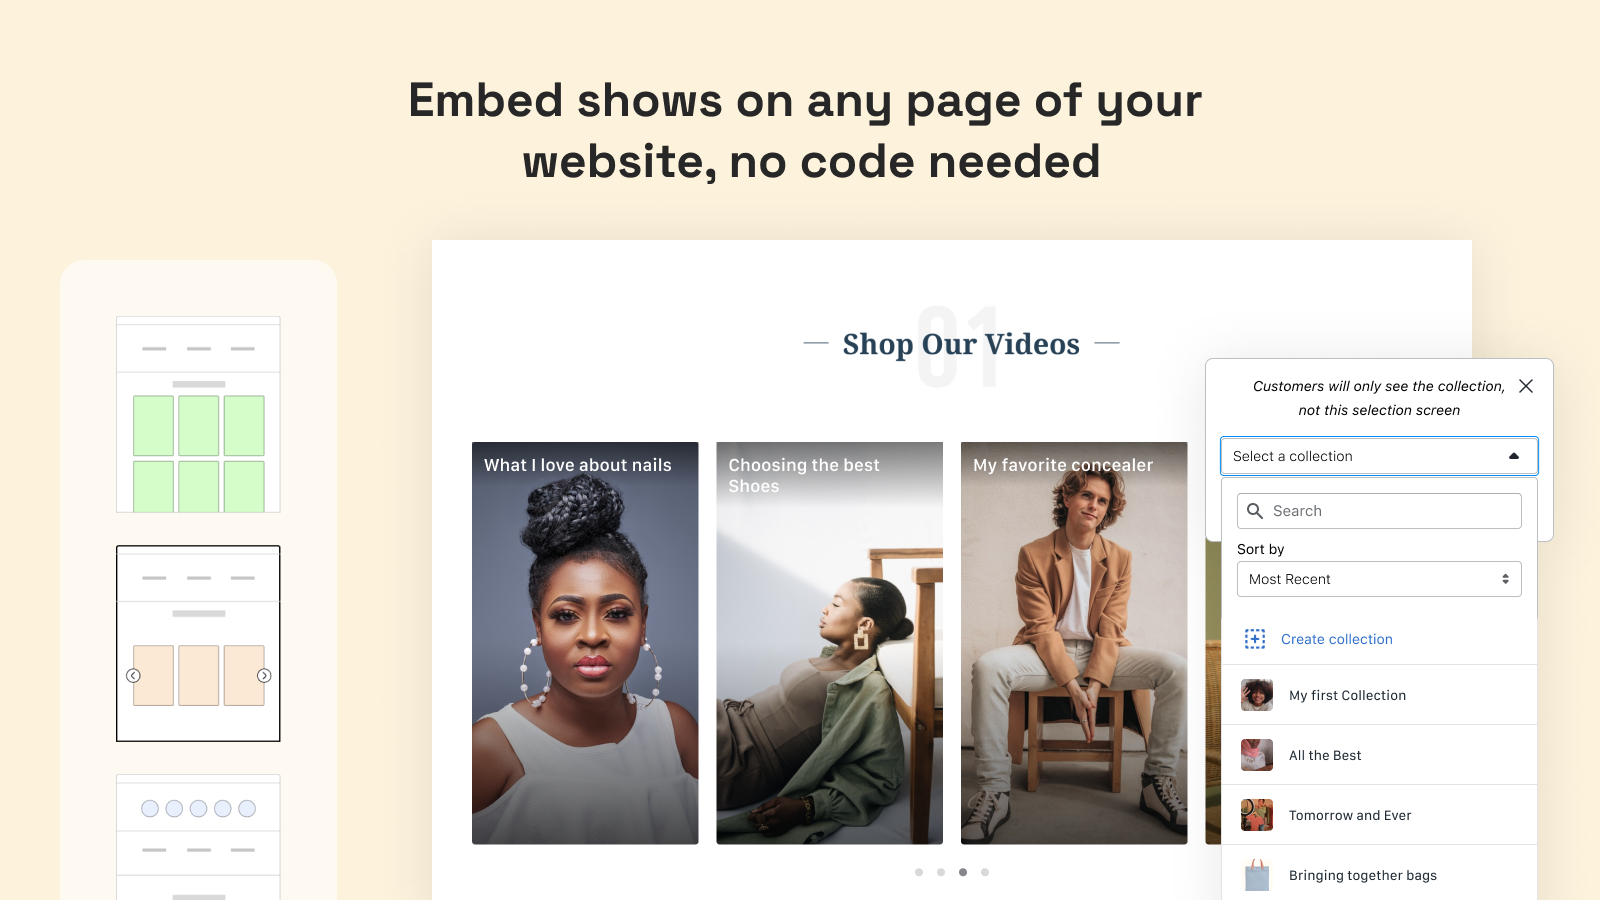 Showday: Embed shows on any page of your website, no code needed